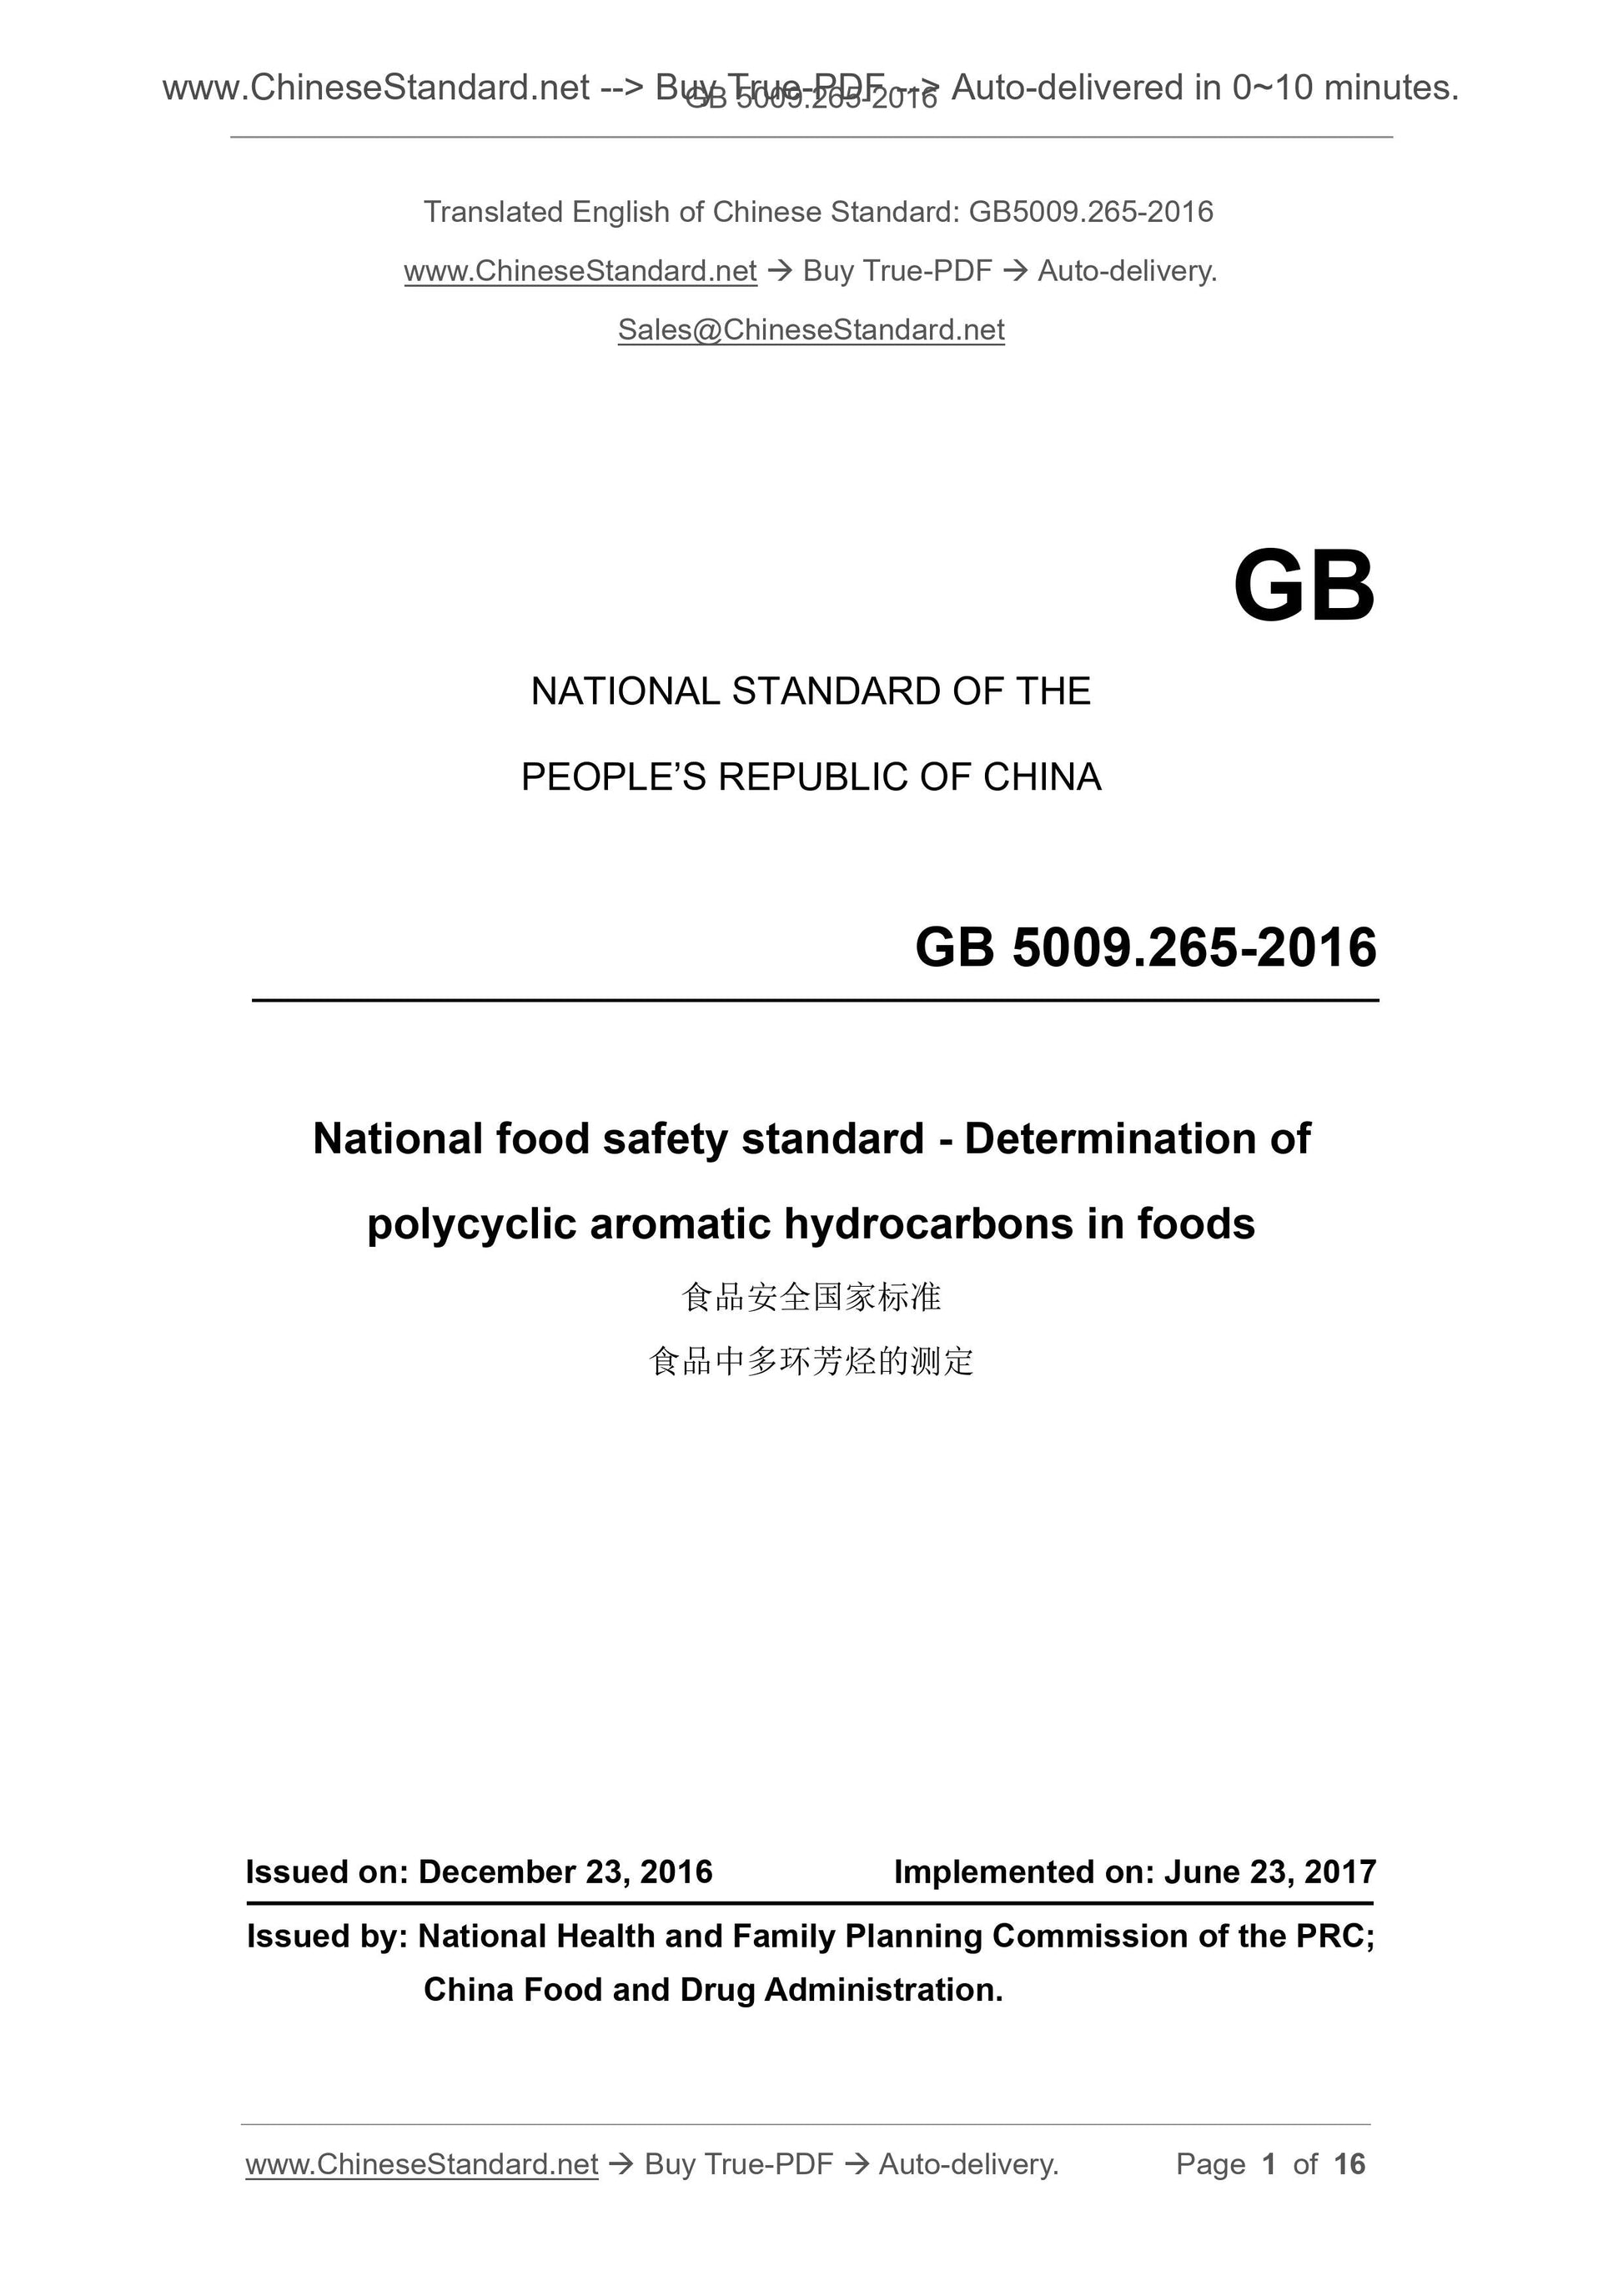 GB 5009.265-2016 Page 1